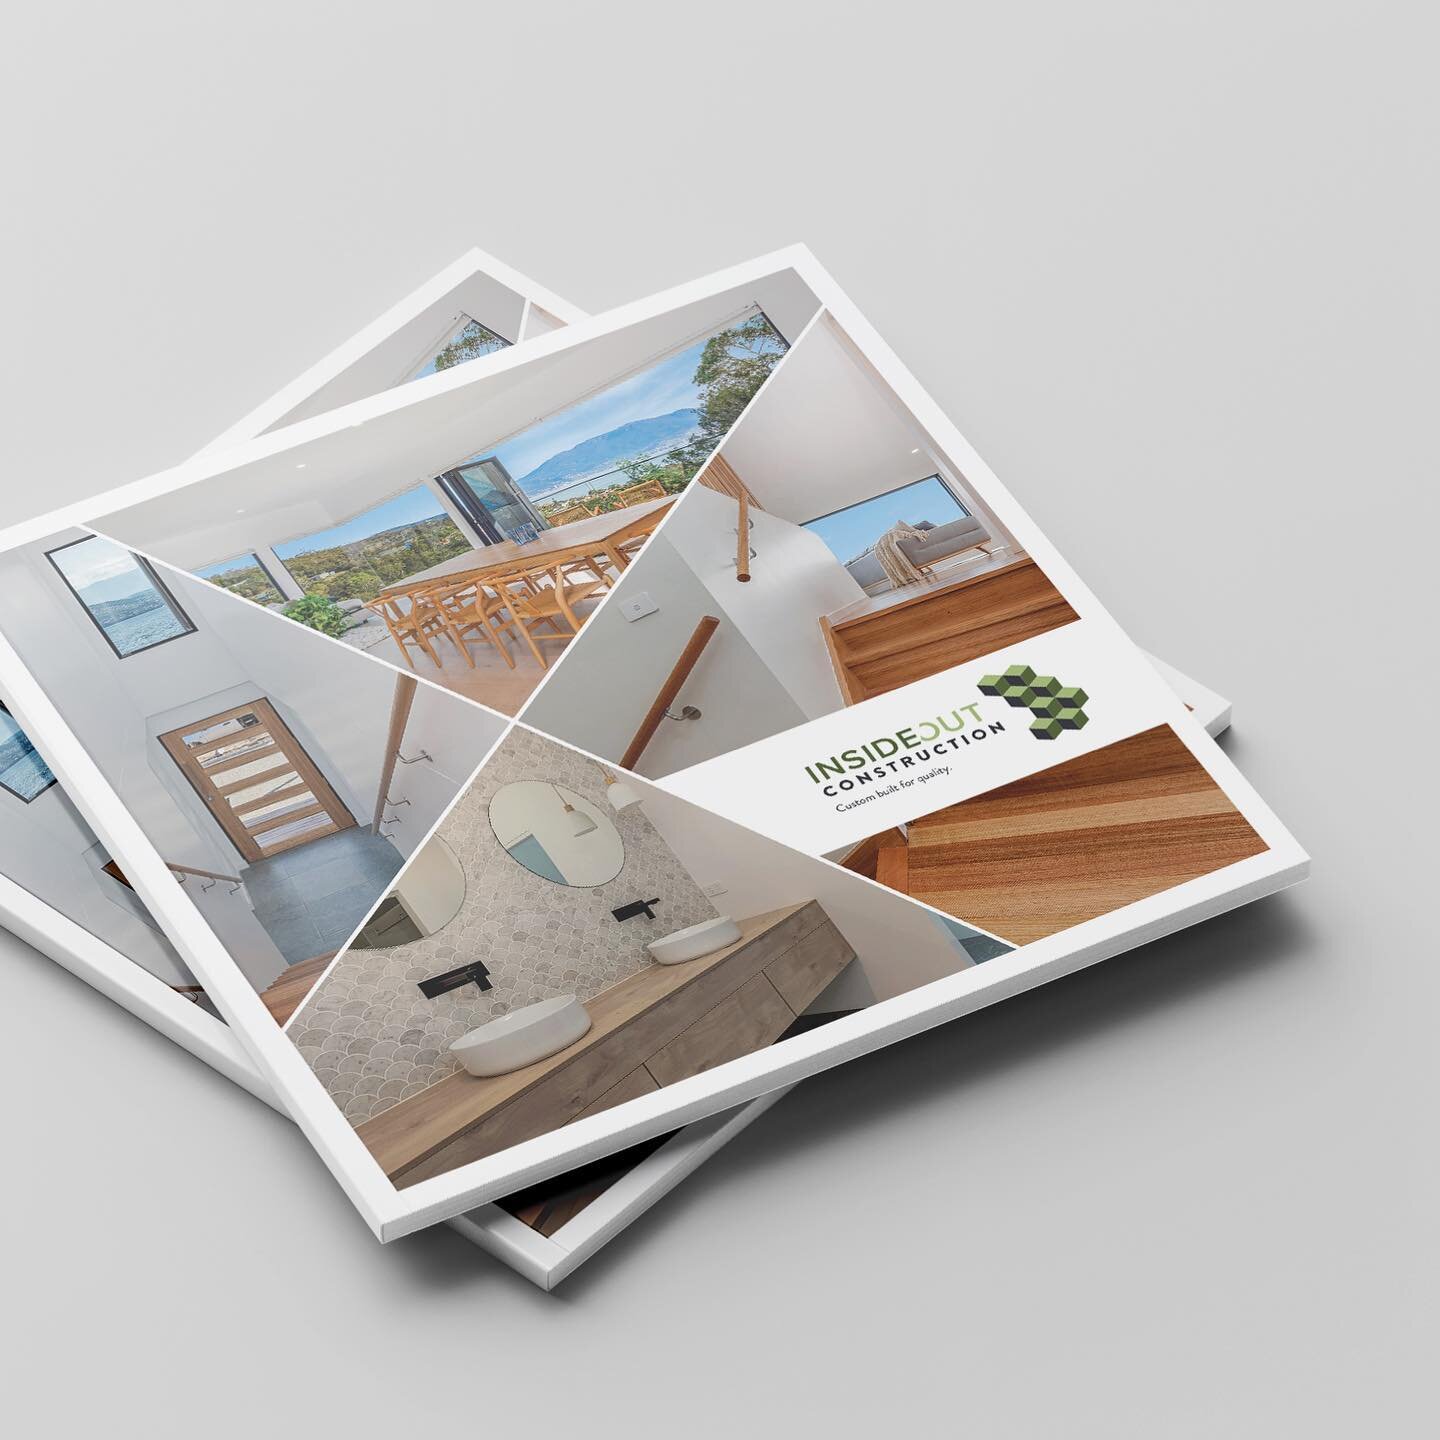 @insideoutconstructionco are specialists in gorgeous high-end hillside custom home builds in Tasmania.

Jacqui and Corey came to us last year to produce a Welcome Booklet to assist their customers in understanding the process and timeline of the buil